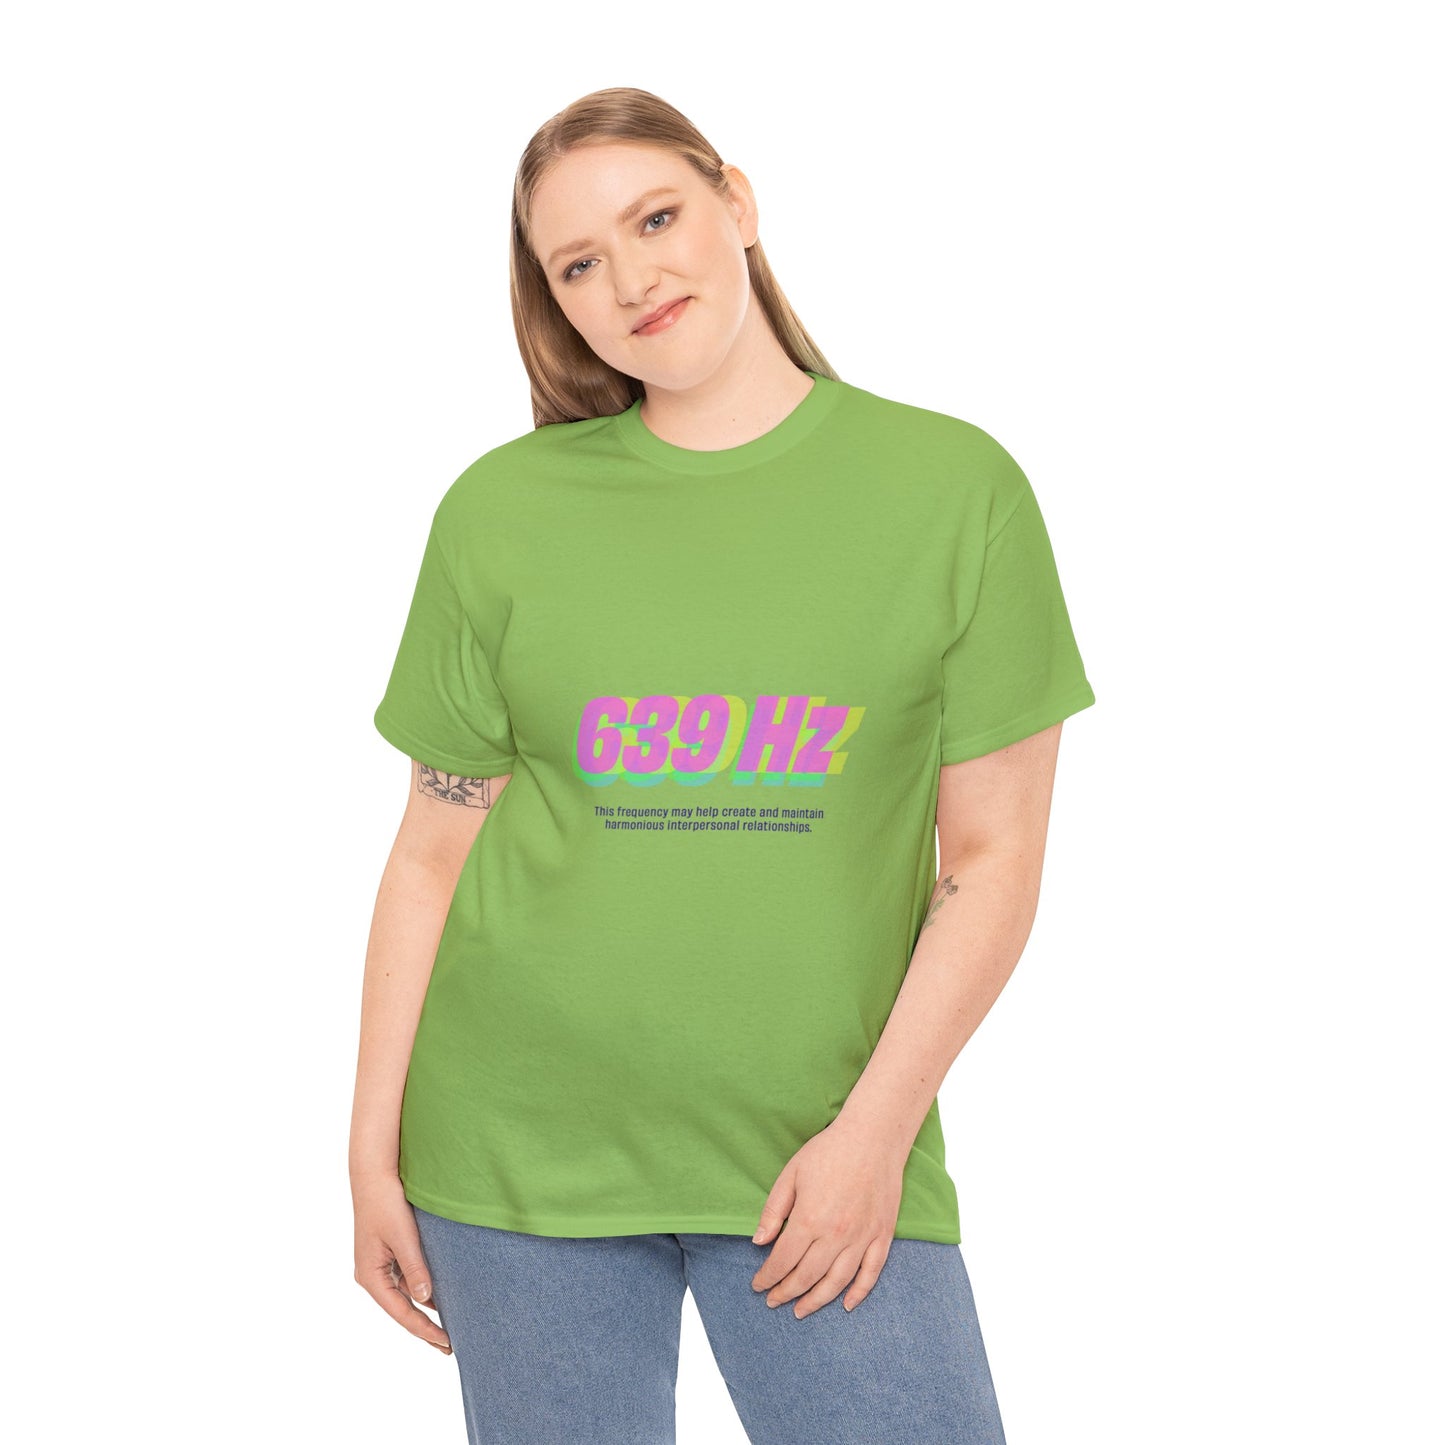 639 Hz Frequency T Shirt